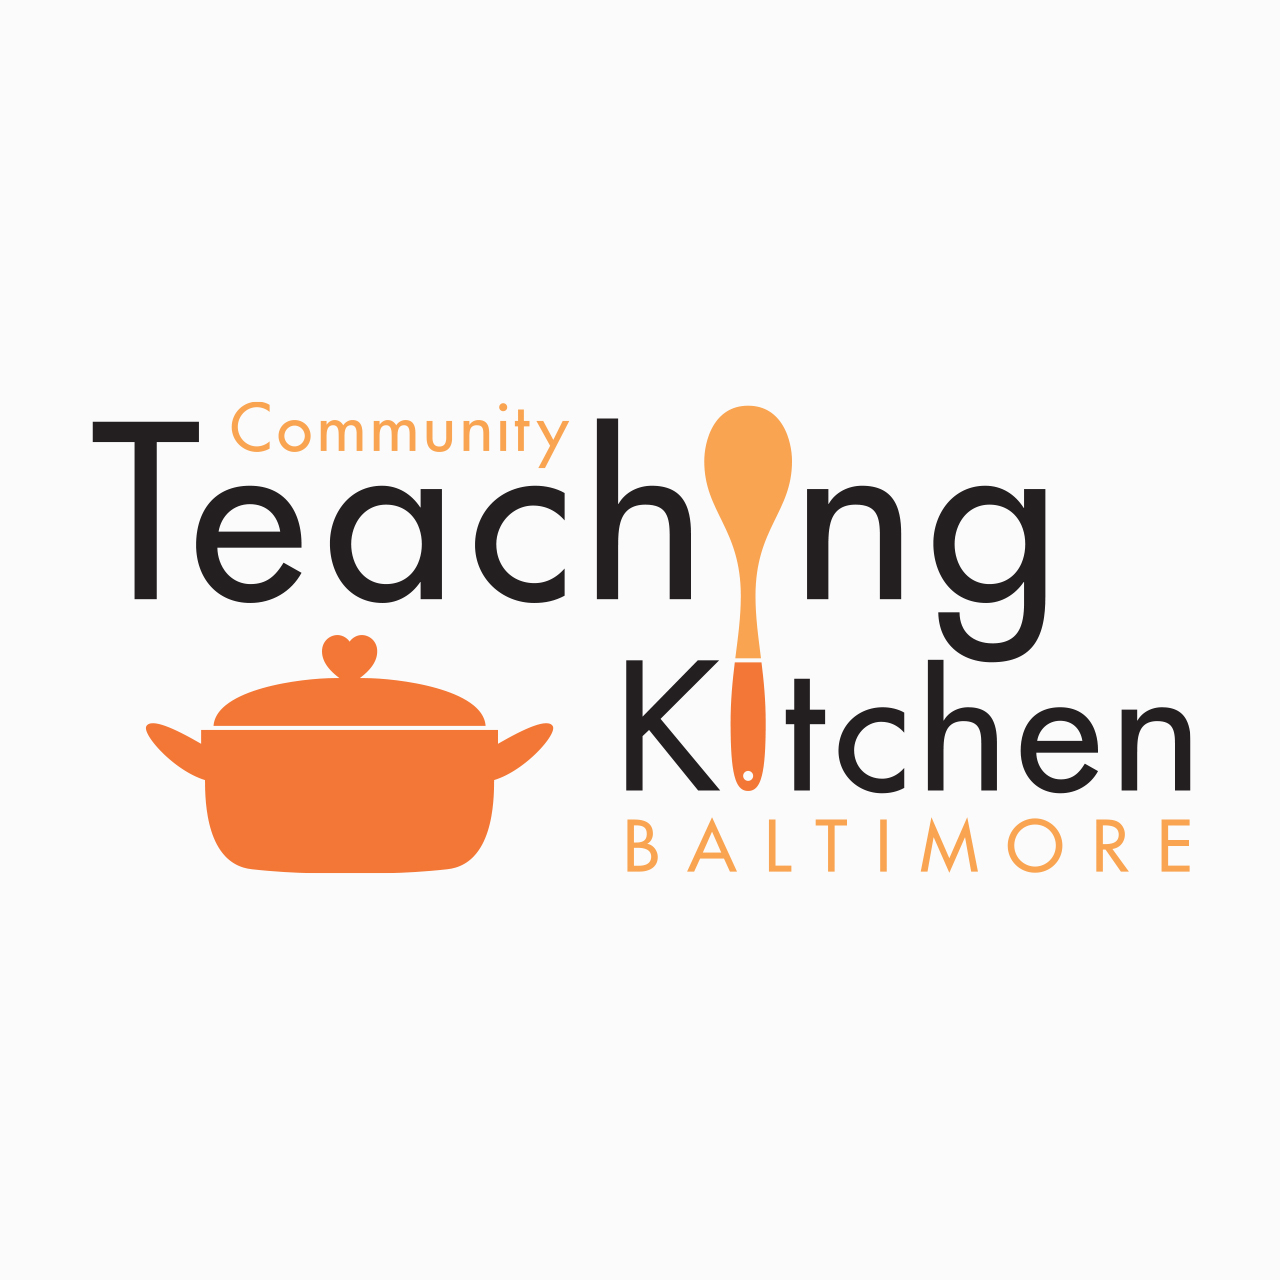 Logo for American Heart Association's healthy cooking program, Community Teaching Kitchen-Baltimore